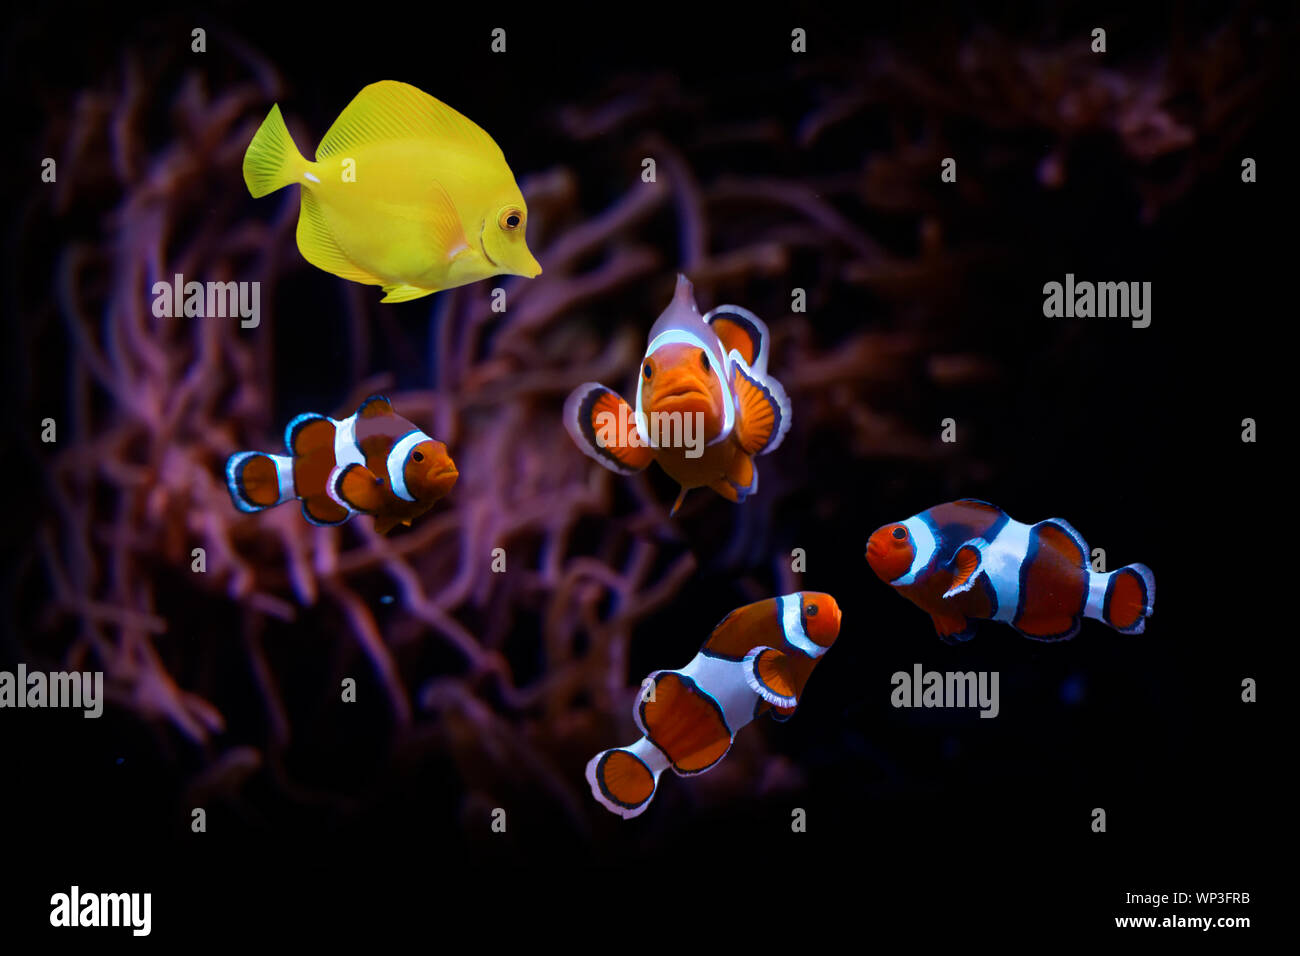 Coral reef with anemone, clown fish, and yellow tang fish on black background Stock Photo